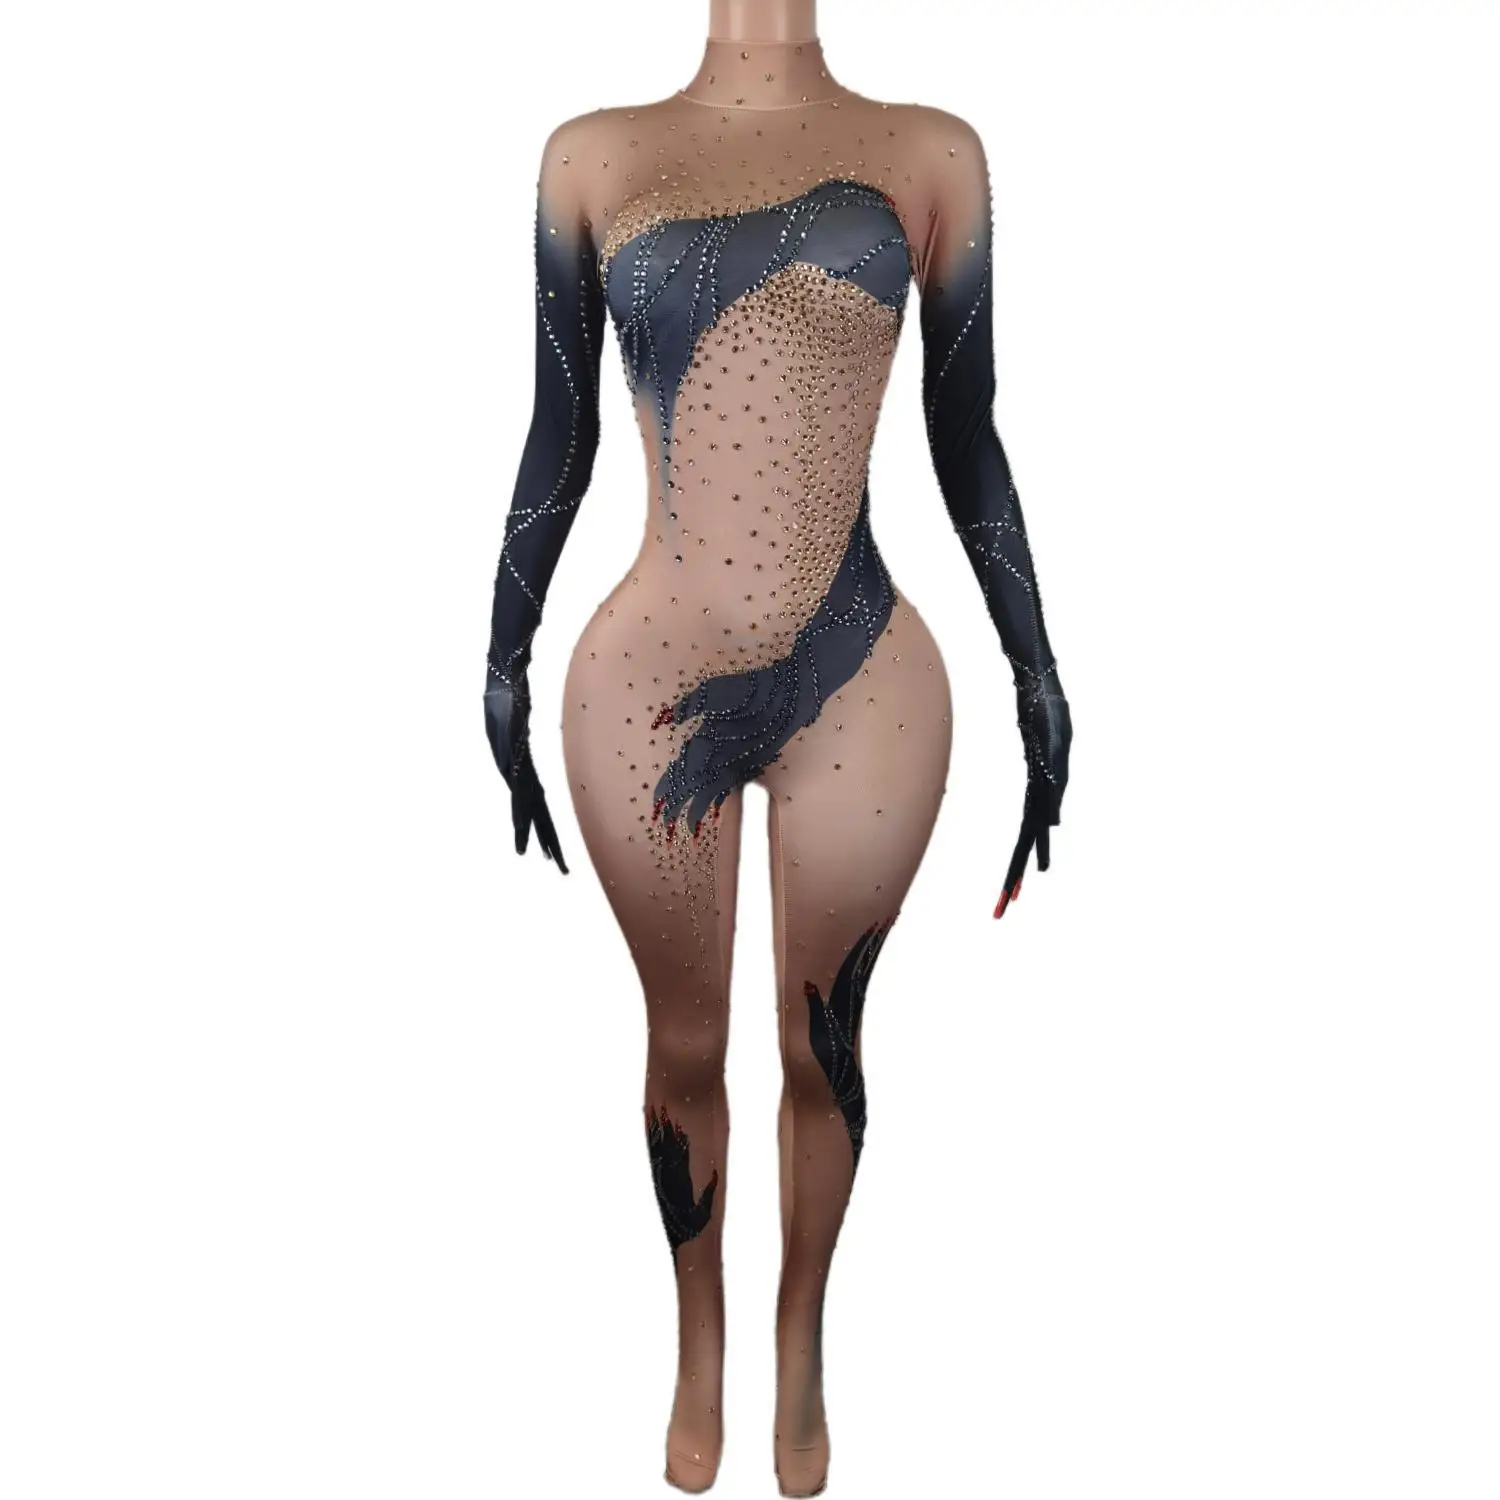 

Latest Jumpsuit for Ladies Sexy Rhinestone Spandex Bodysuits Party Dance Costumes Women Stones and Crystals Long Sleeve Leotard